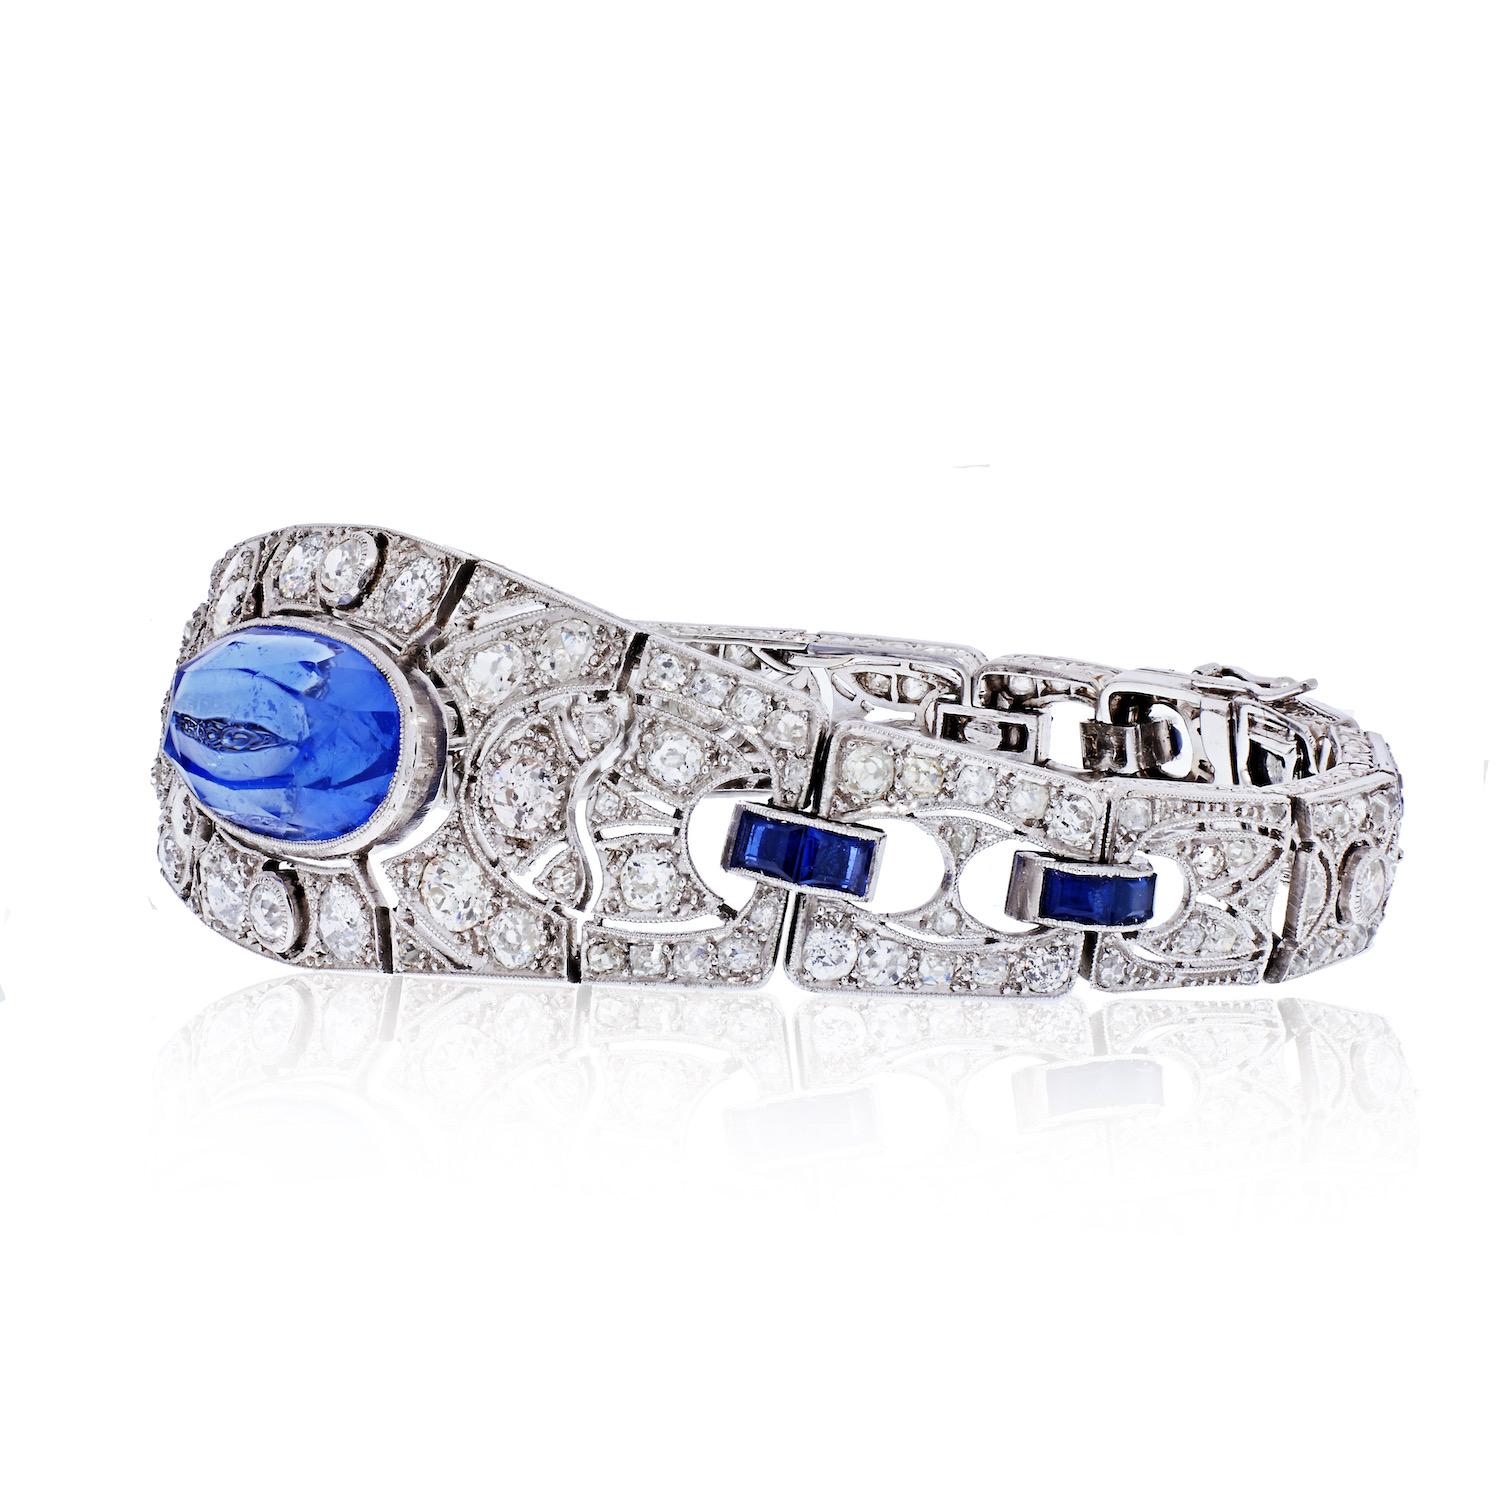 Centering an over 20 Carat Ceylon (Sri Lanka) Cornflower Blue Sapphire, accented by 14 Princess-Cut Blue Sapphires and 166 Old-European Cut Diamonds, and set in a 18K Gold/Platinum blend, this classic Art Deco bracelet is designed by famed Swiss